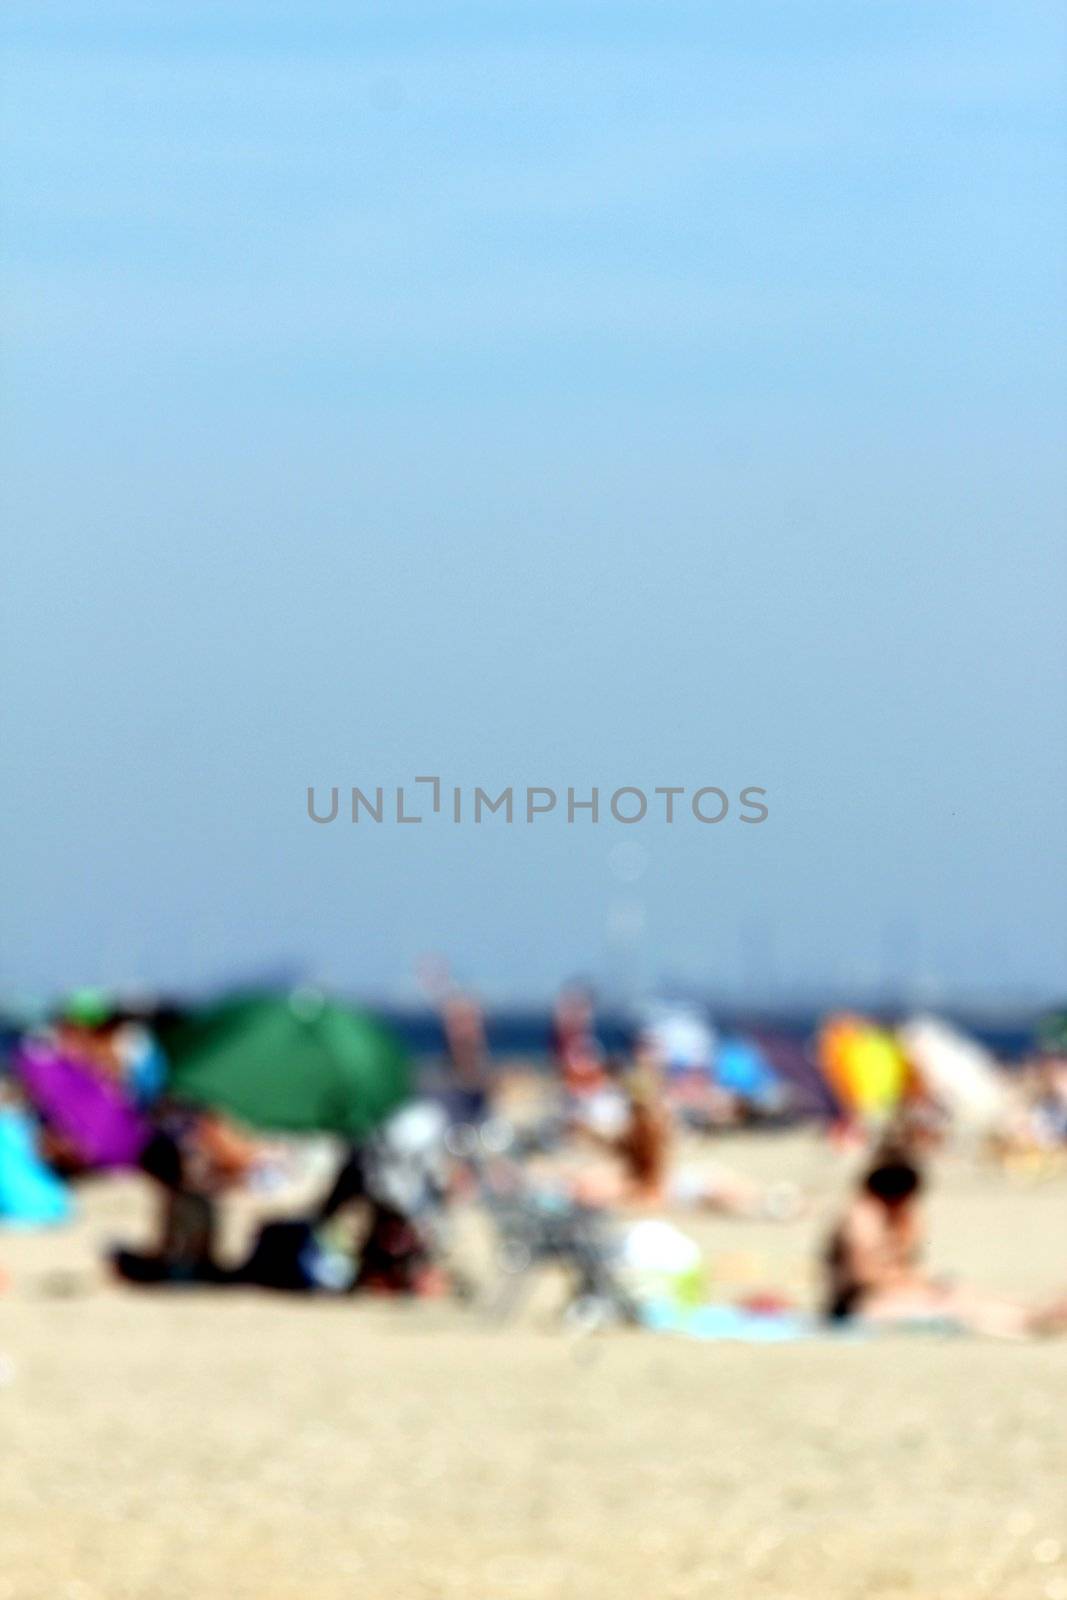 blur background : people relaxing on the beach by Teka77